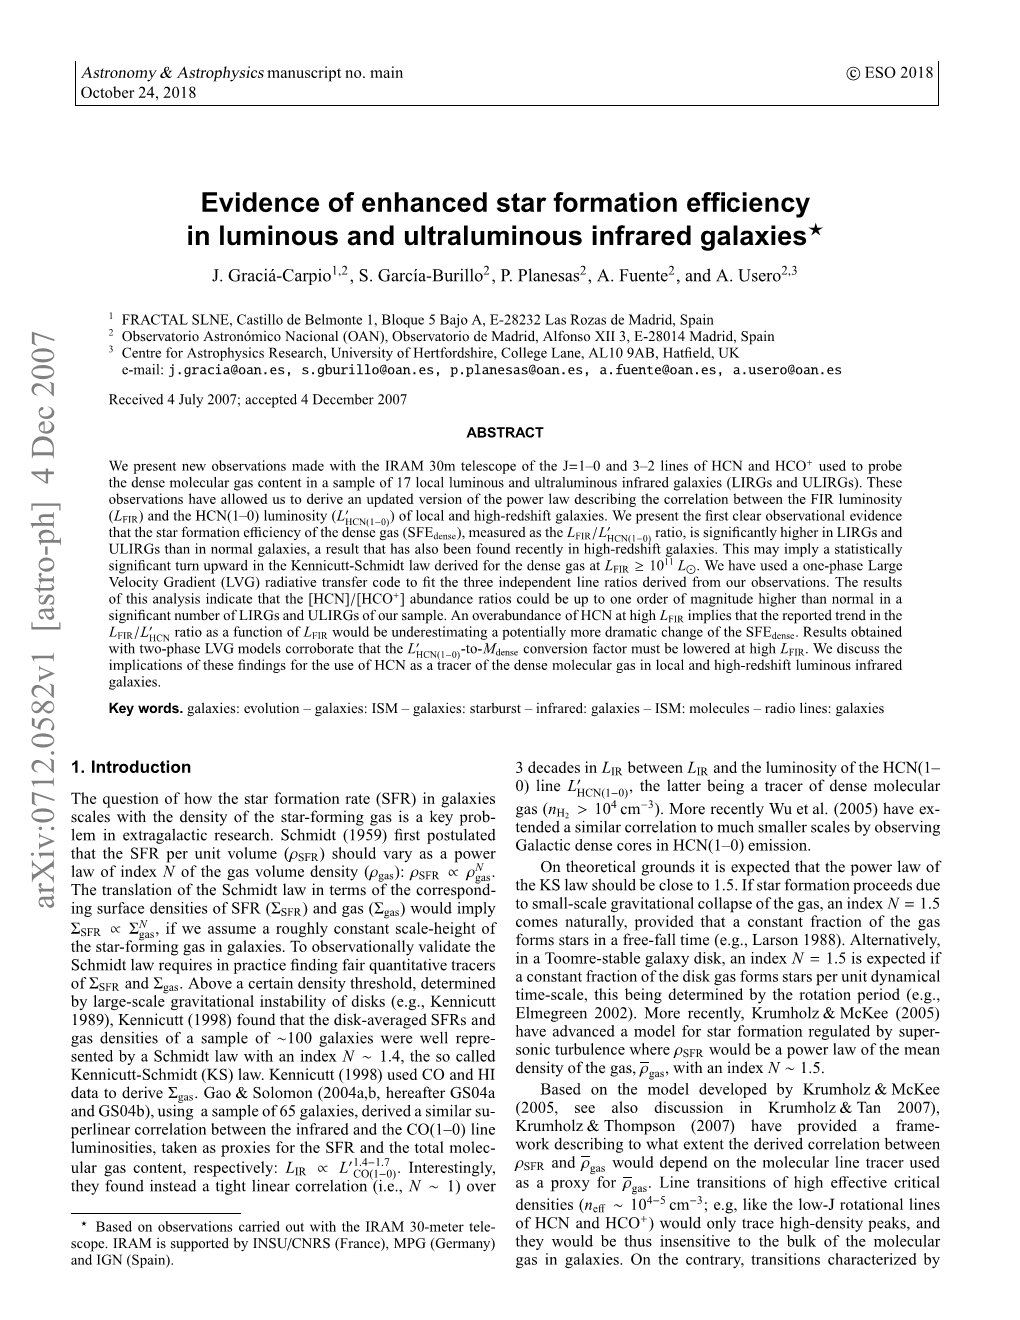 Evidence of Enhanced Star Formation Efficiency in Luminous And